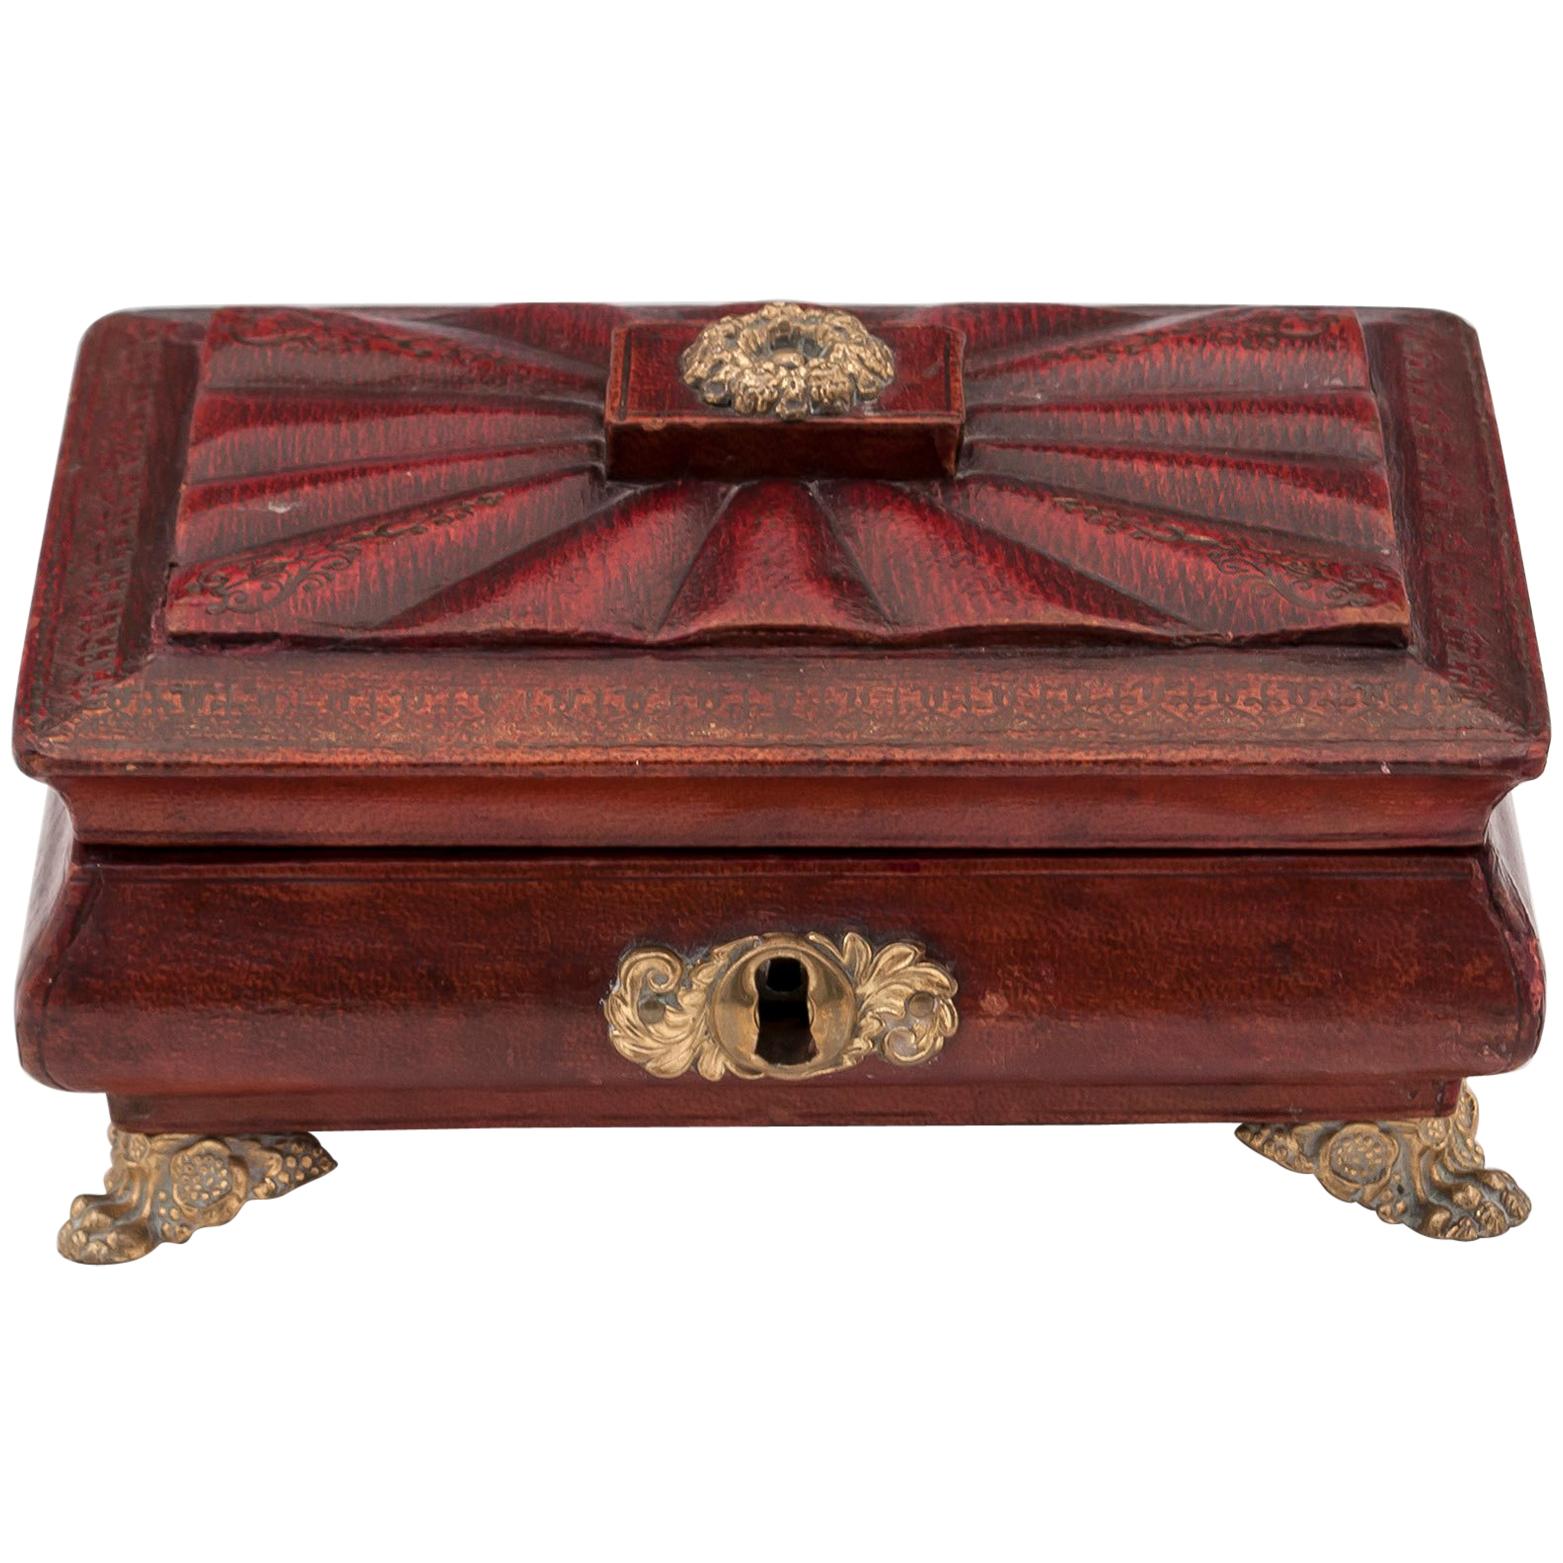 Regency Antique Red Leather Brass Bone Sewing Needlework Box For Sale